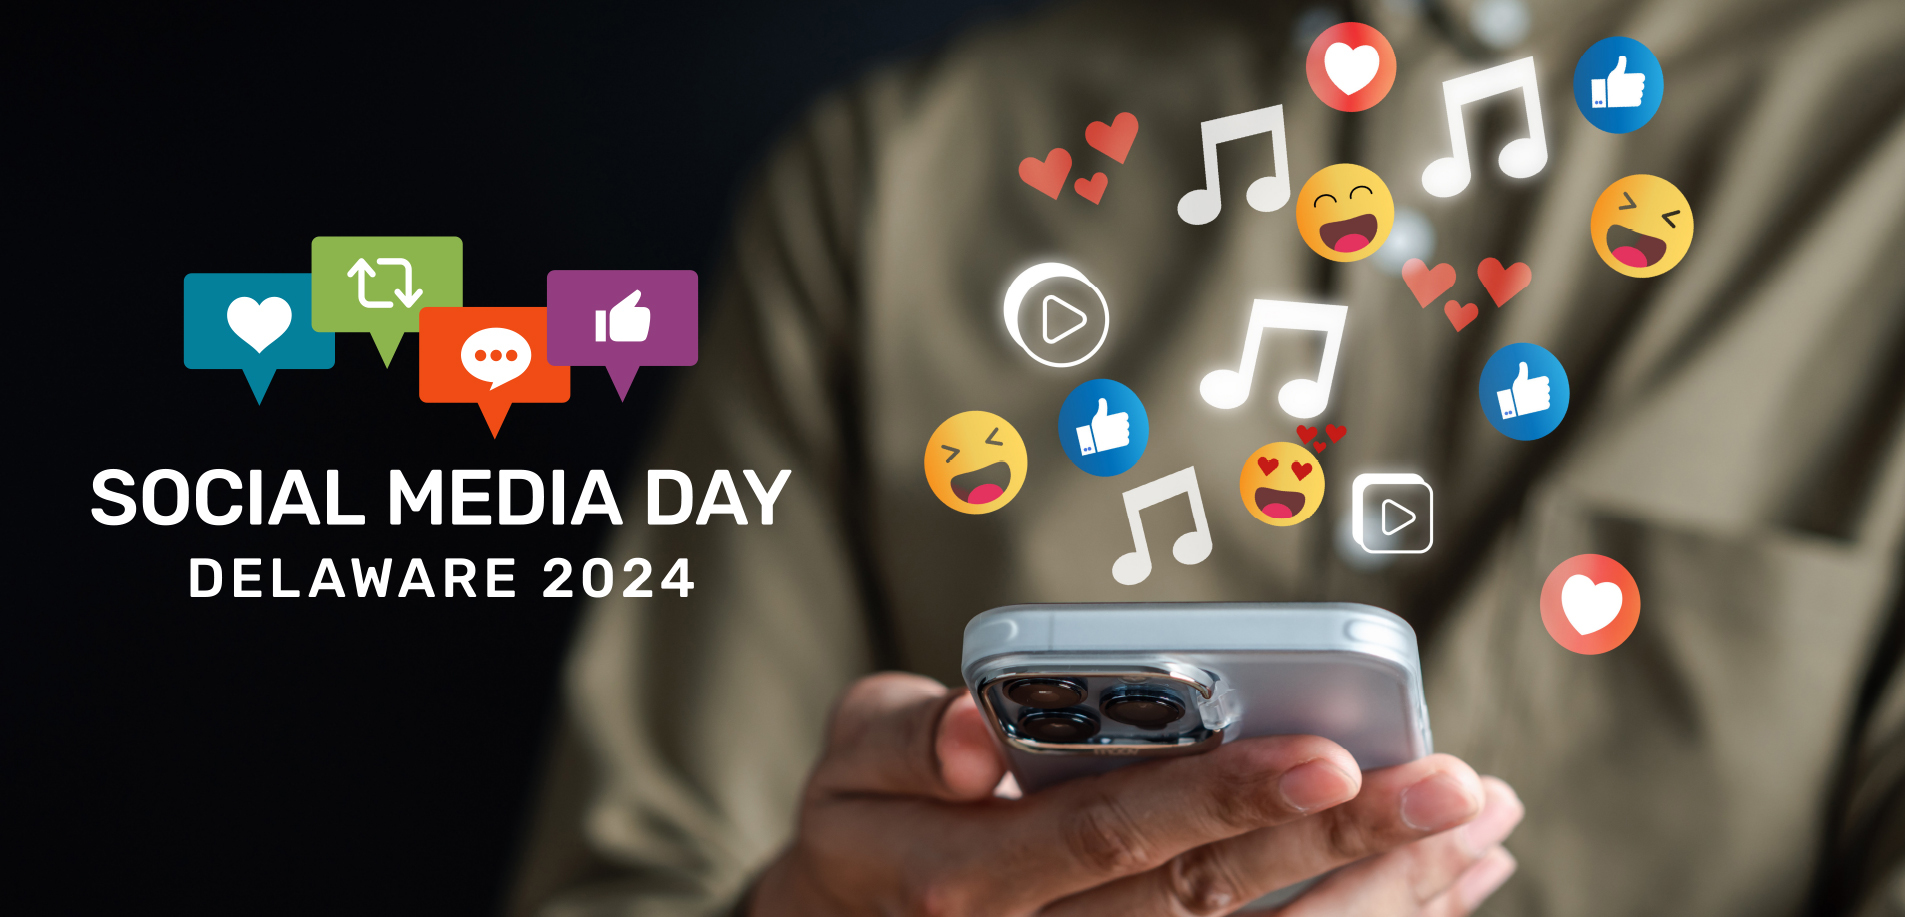 mobile device with emoticons and text reading "Social Media Day Delaware 2024"